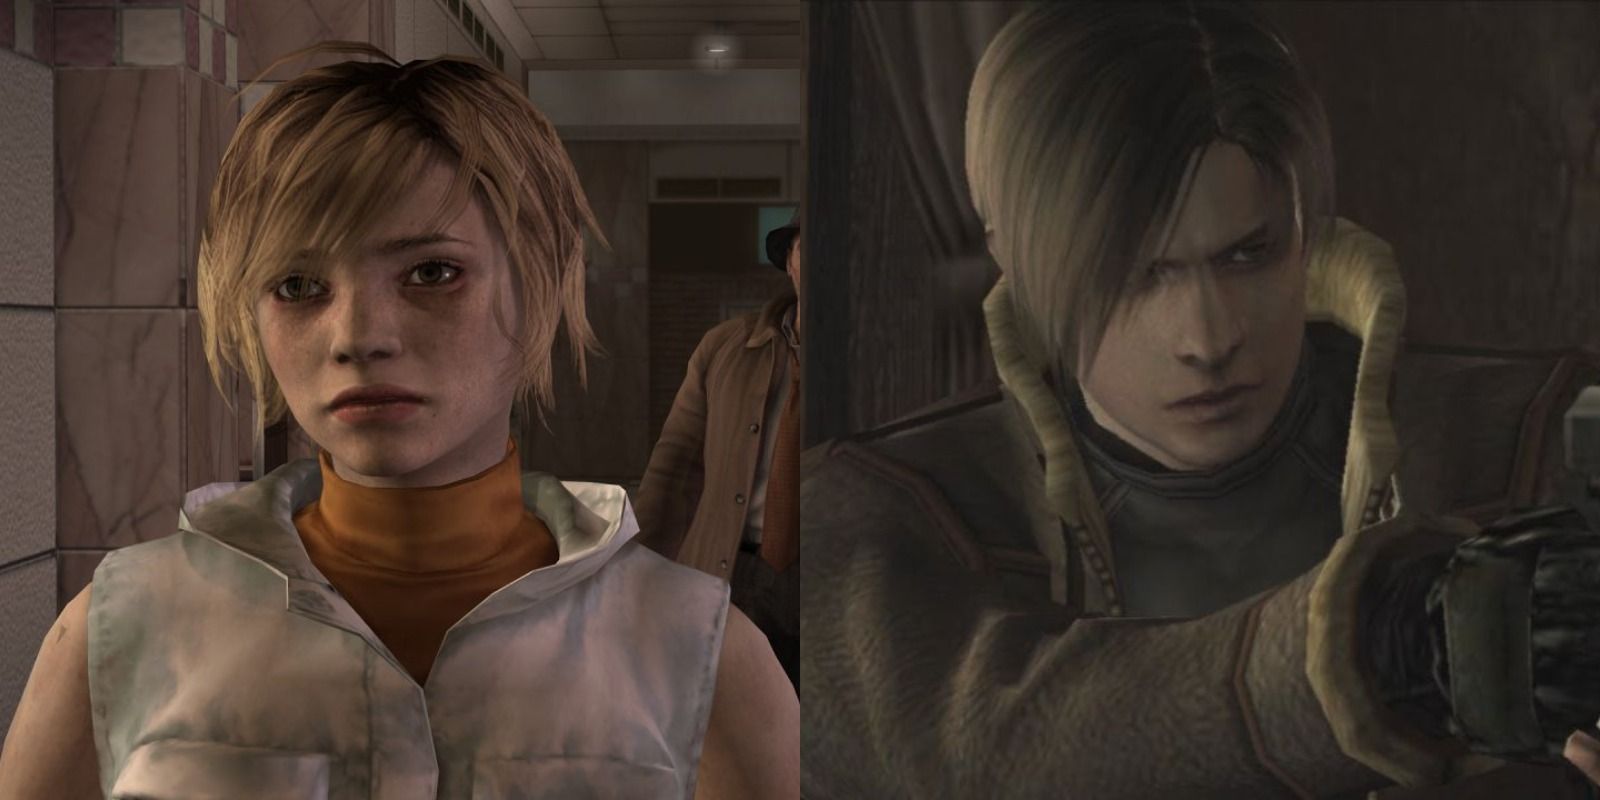 Split image of Heather from Silent Hill 3 and Leon from Resident Evil 4